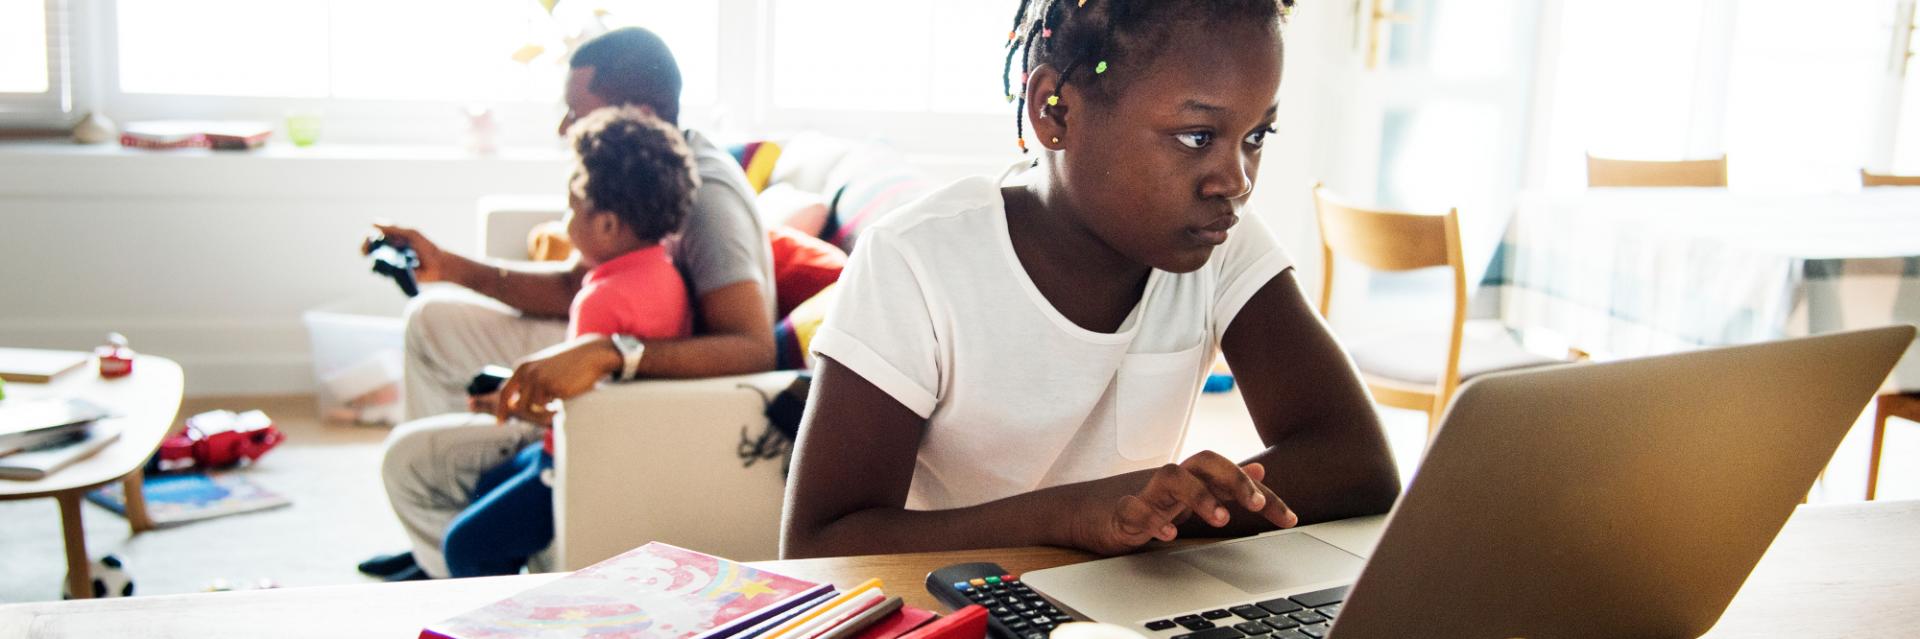 Empowering young Africa girls through technology